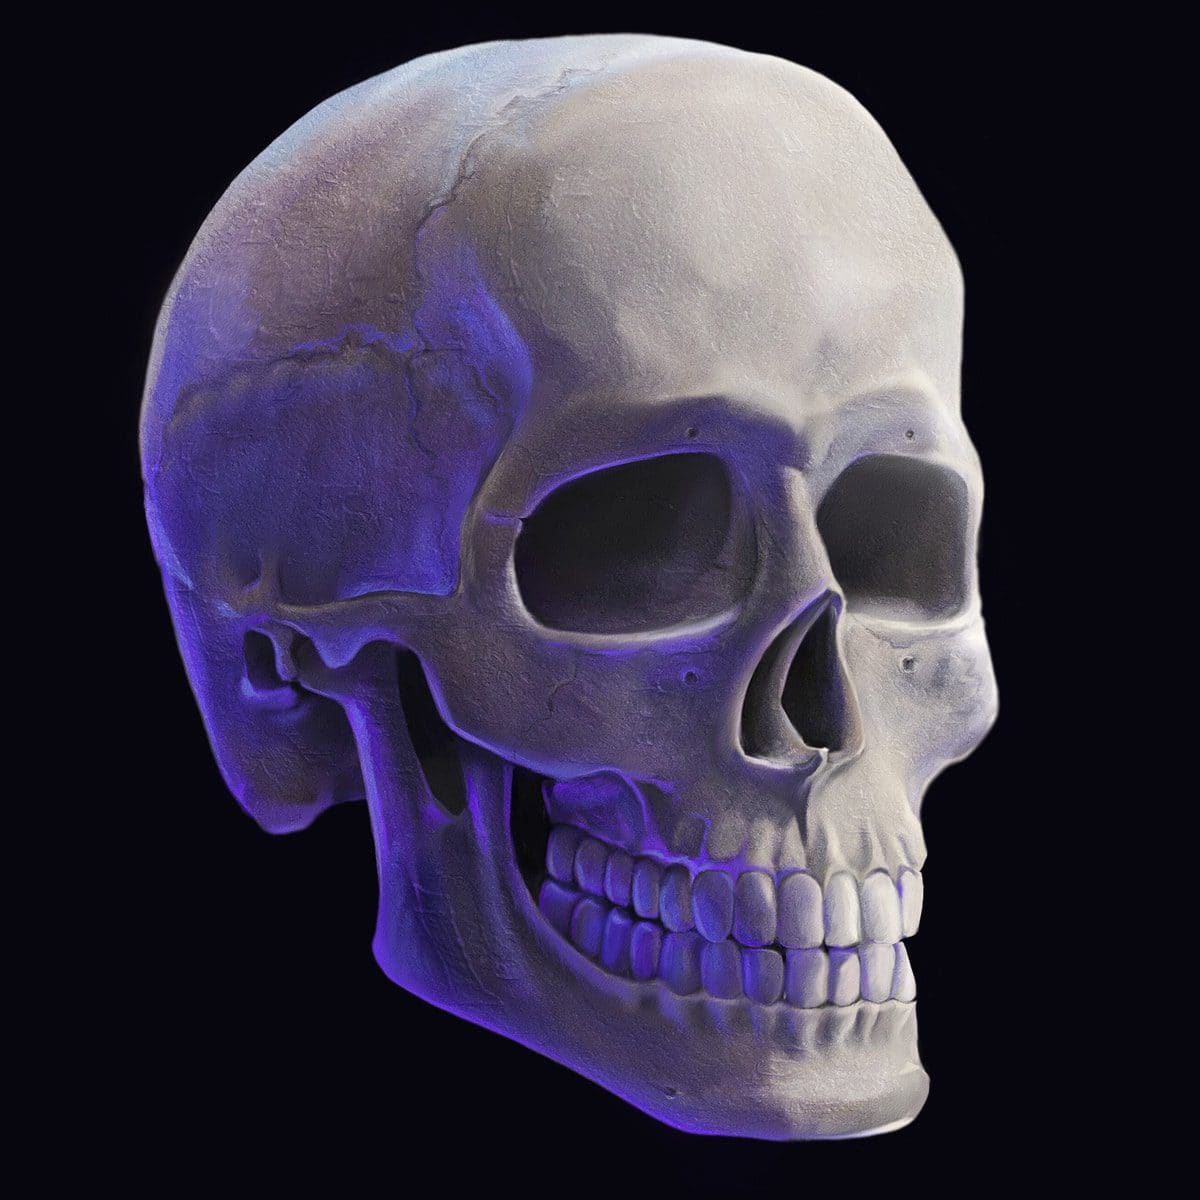 The back part of the reference skull is cut away.